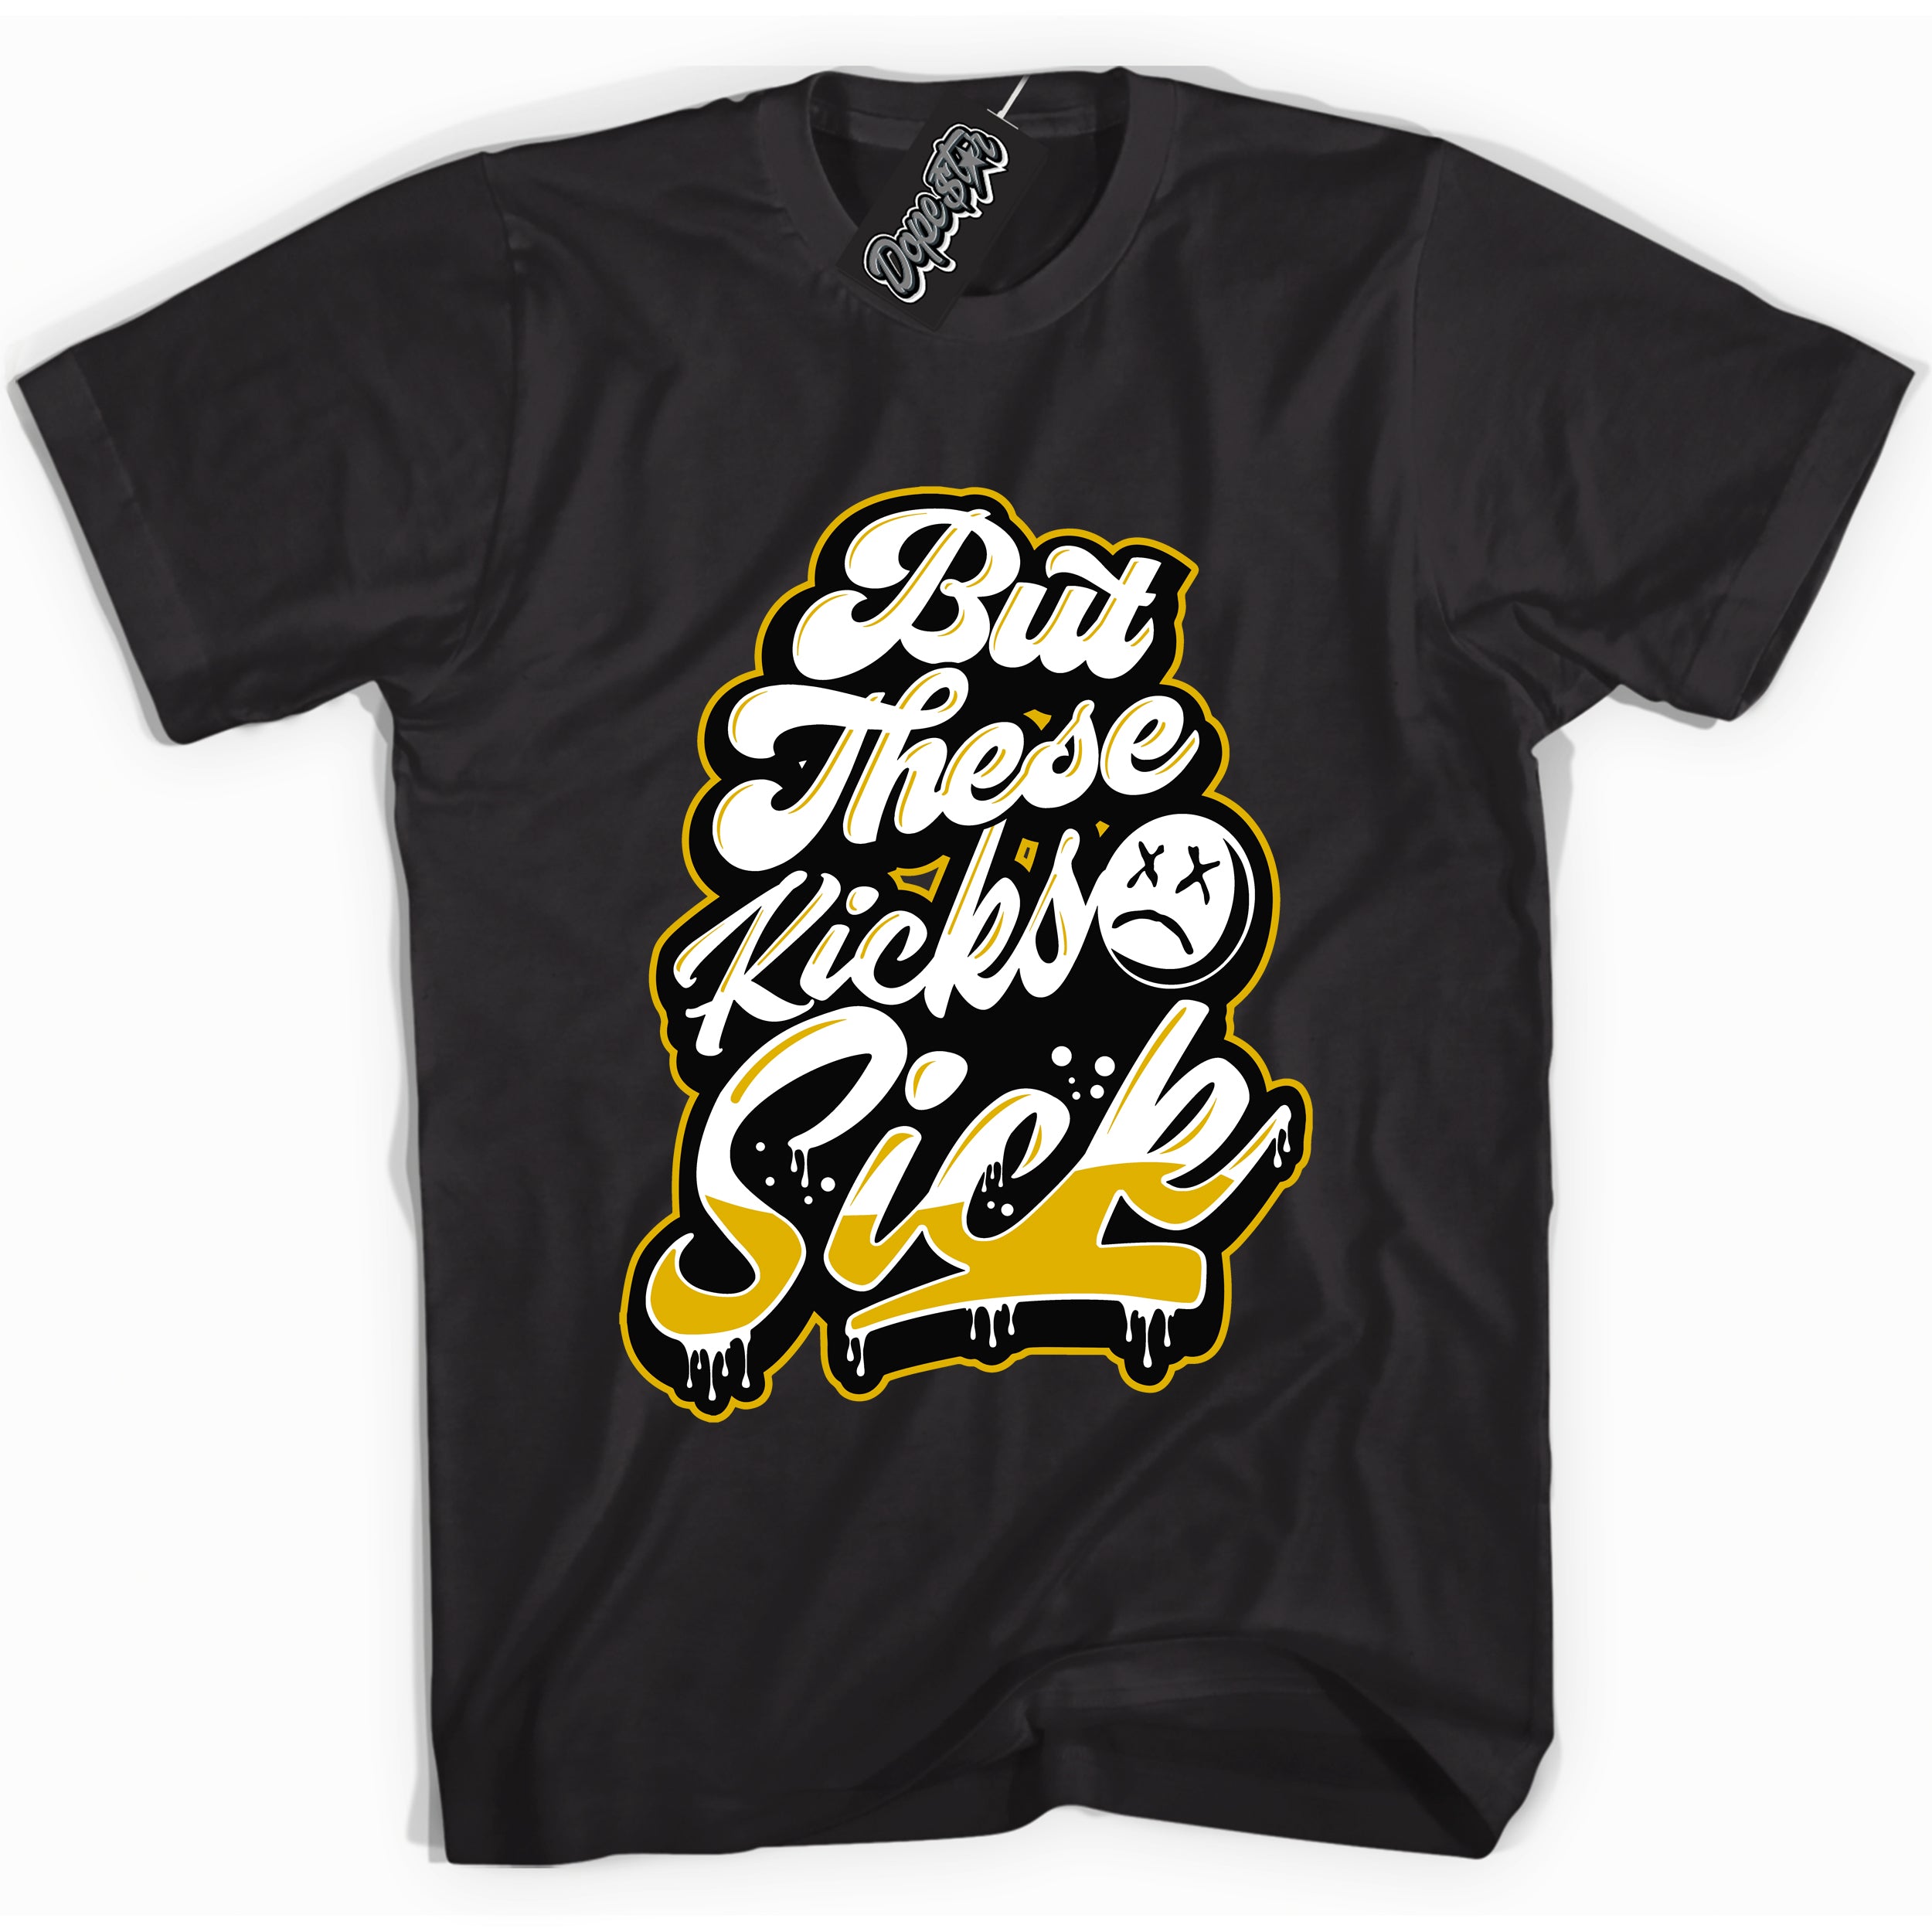 Cool Black Shirt with “ Kick Sick ” design that perfectly matches Yellow Ochre 6s Sneakers.